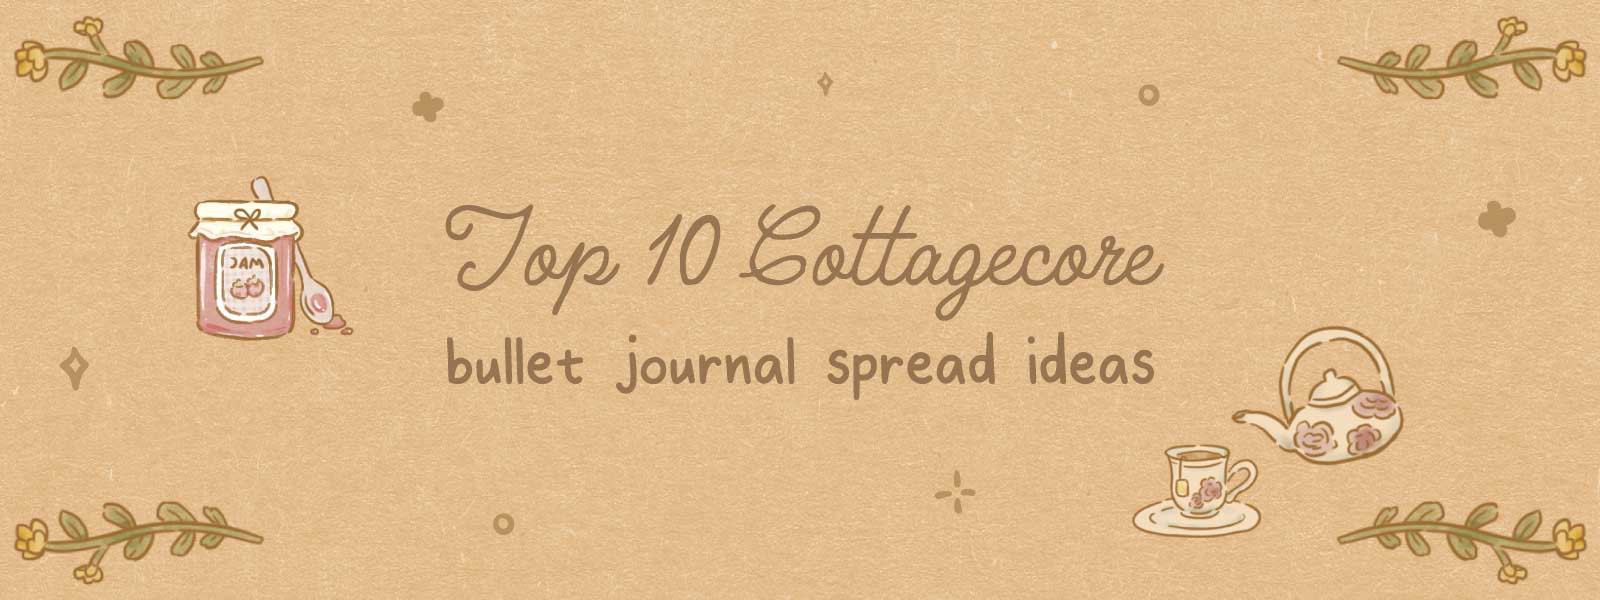 Undated Bullet Journal Spread  Cottage Core Mushroom Theme – The